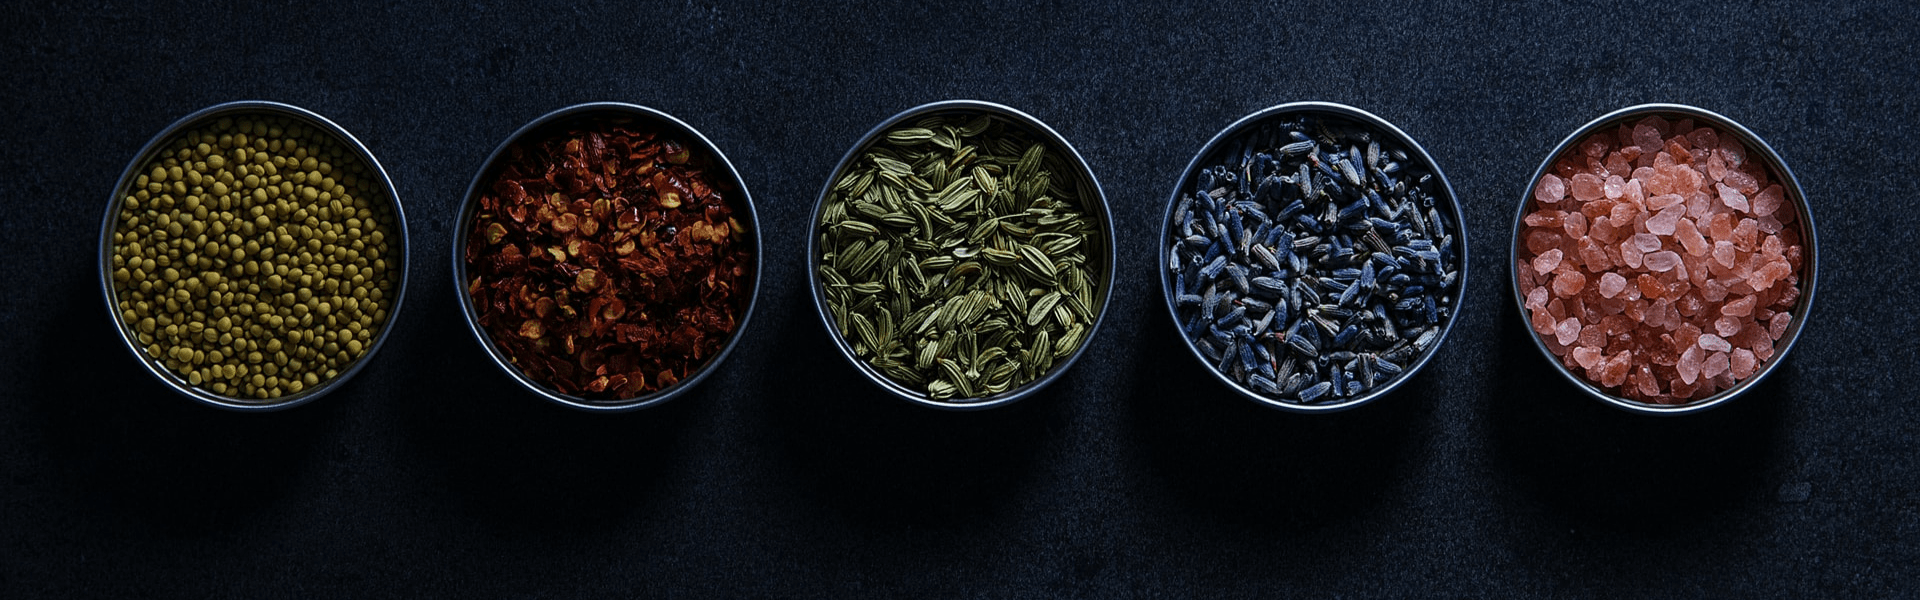 Discovering the high value spices of Meghalaya